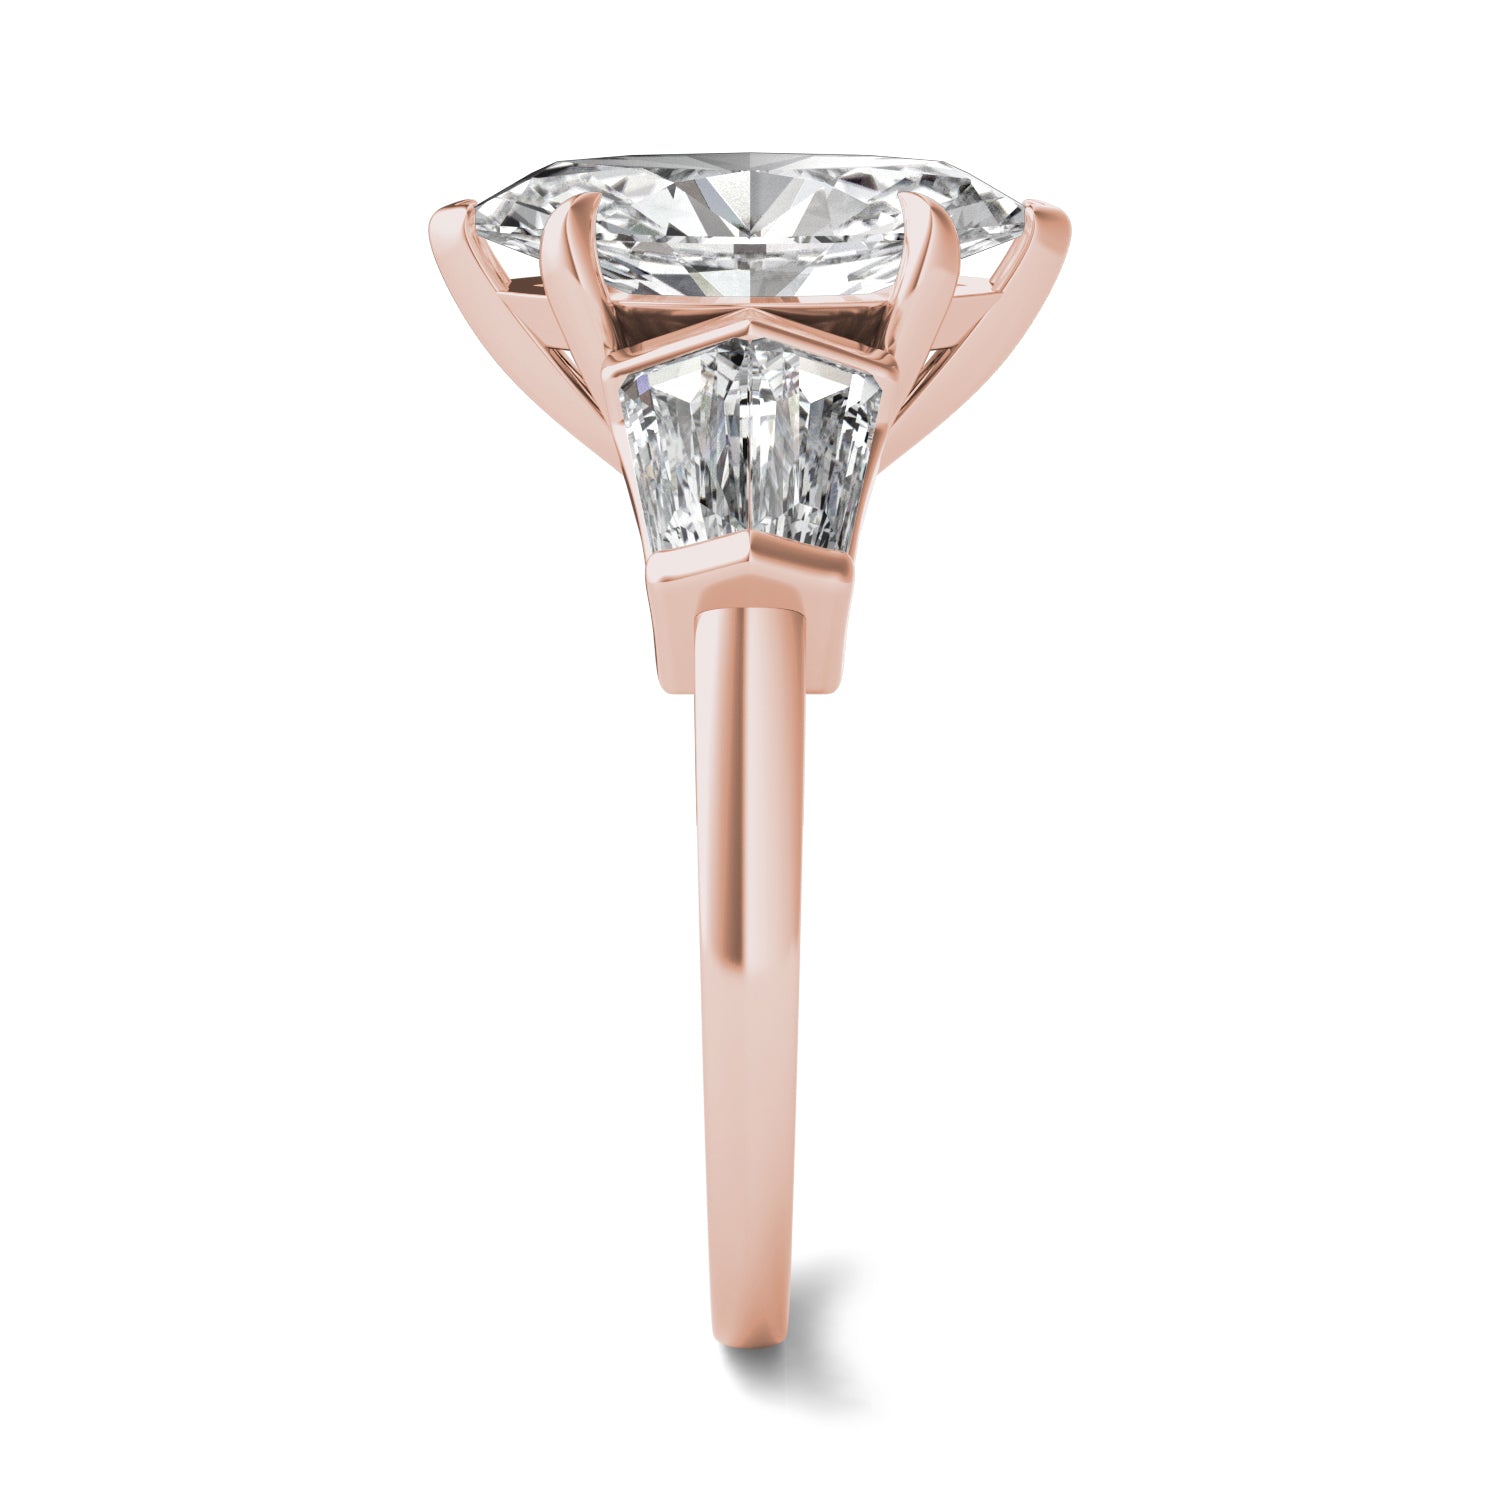 3.36 CTW DEW Marquise Moissanite Five Stone Ring in 14K Rose Gold